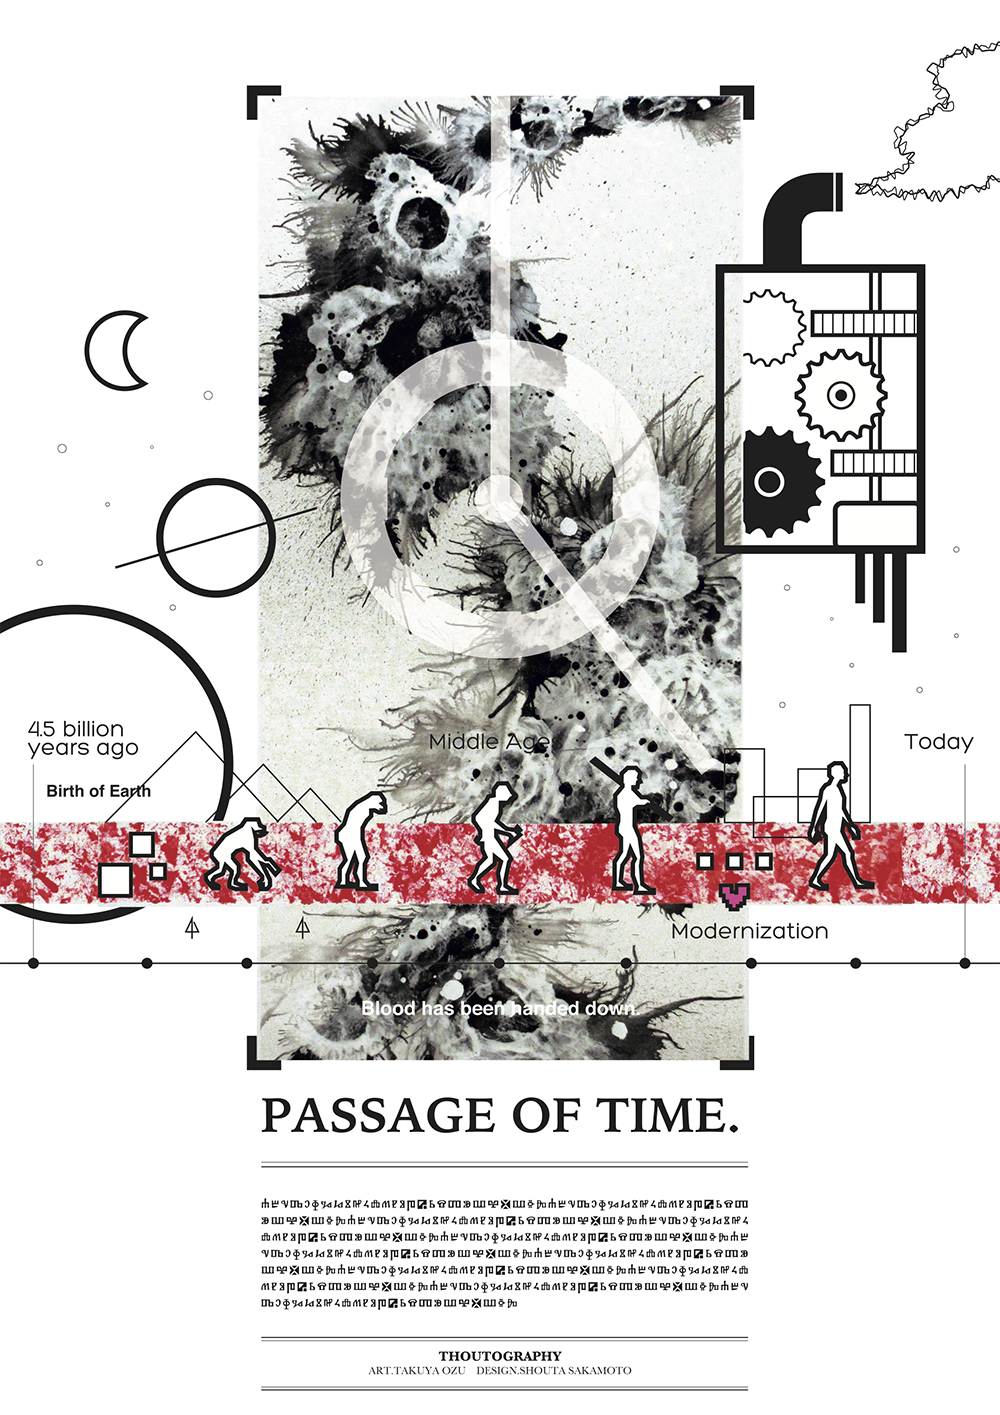 PASSAGE OF TIME